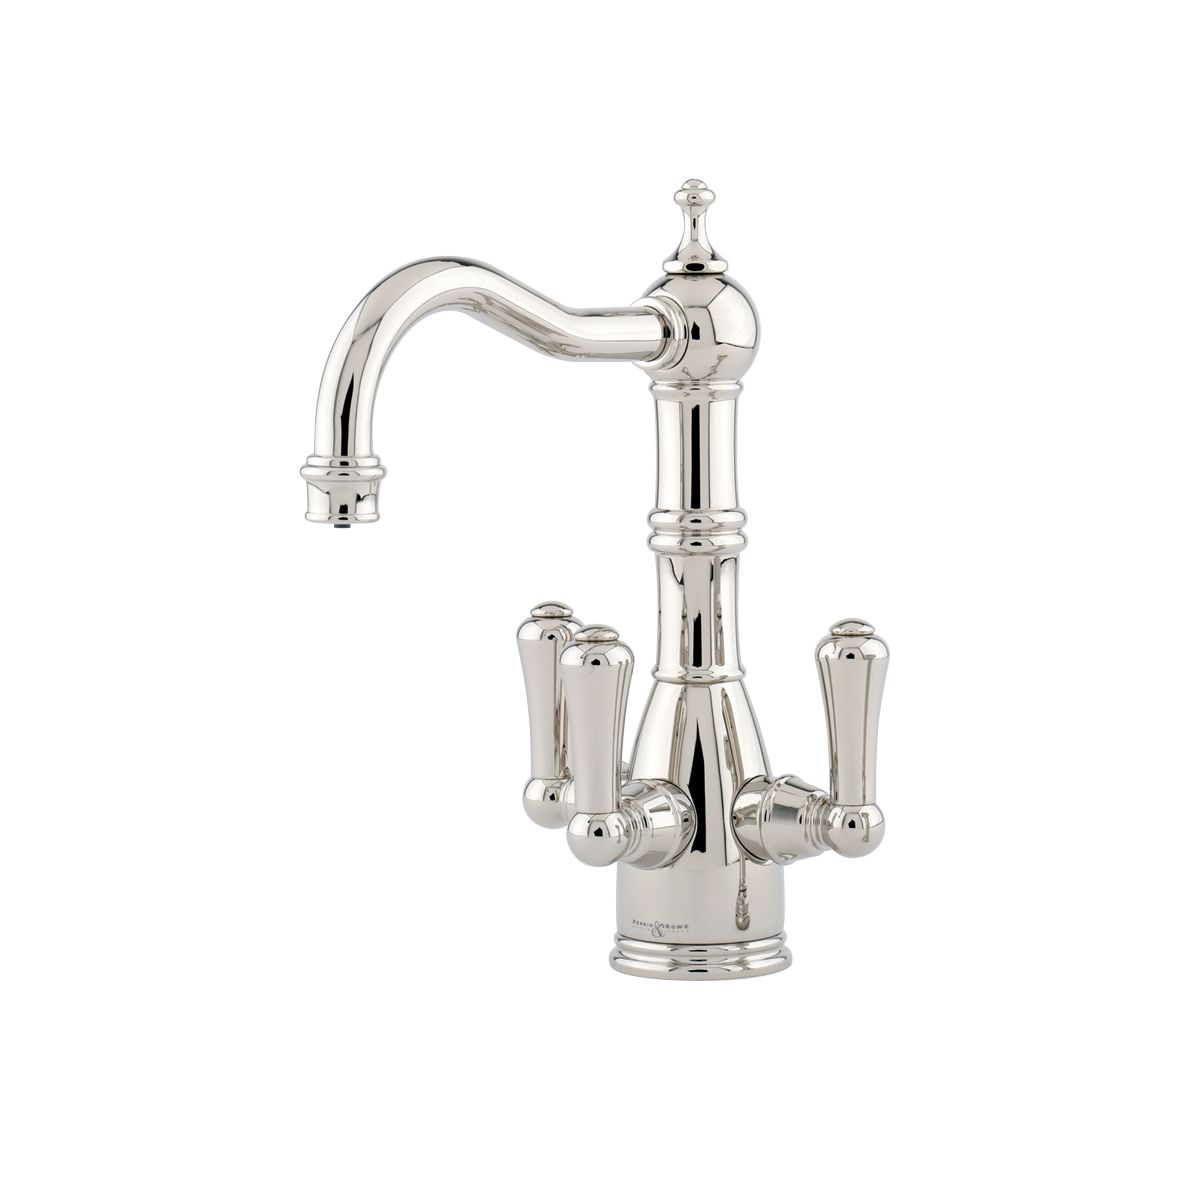 Perrin &amp; Rowe Picardie Mixer Tap with Filtration